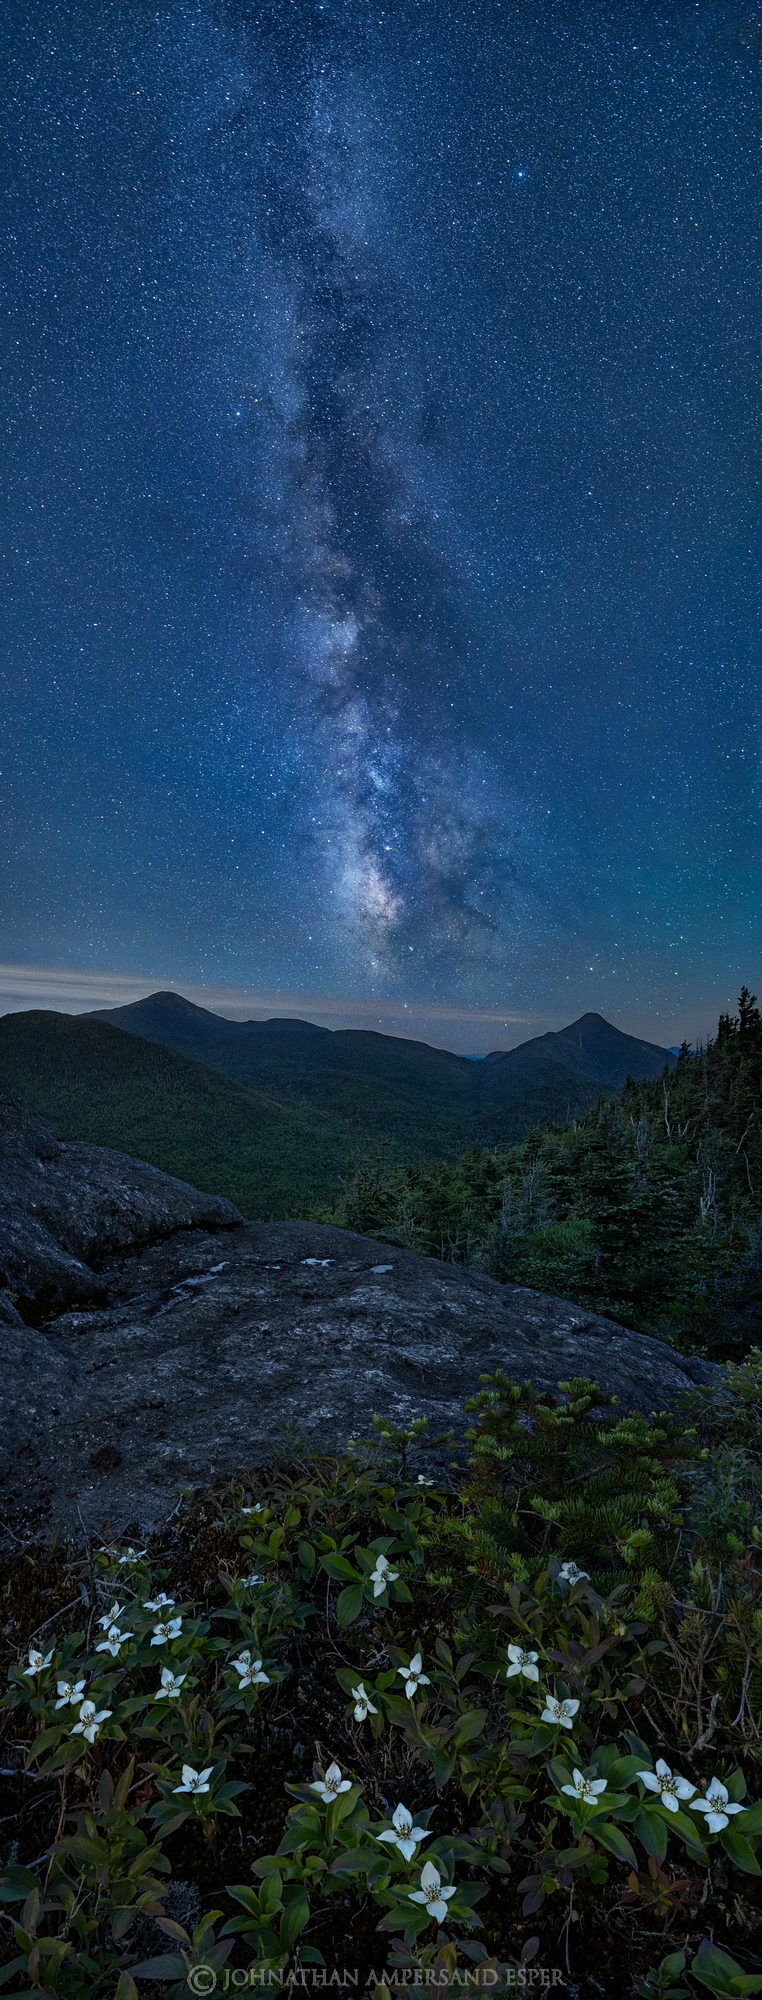 Here in the Adirondacks it sometimes feels that as photographers are not pushing ourselves as far as we can creatively and technically...